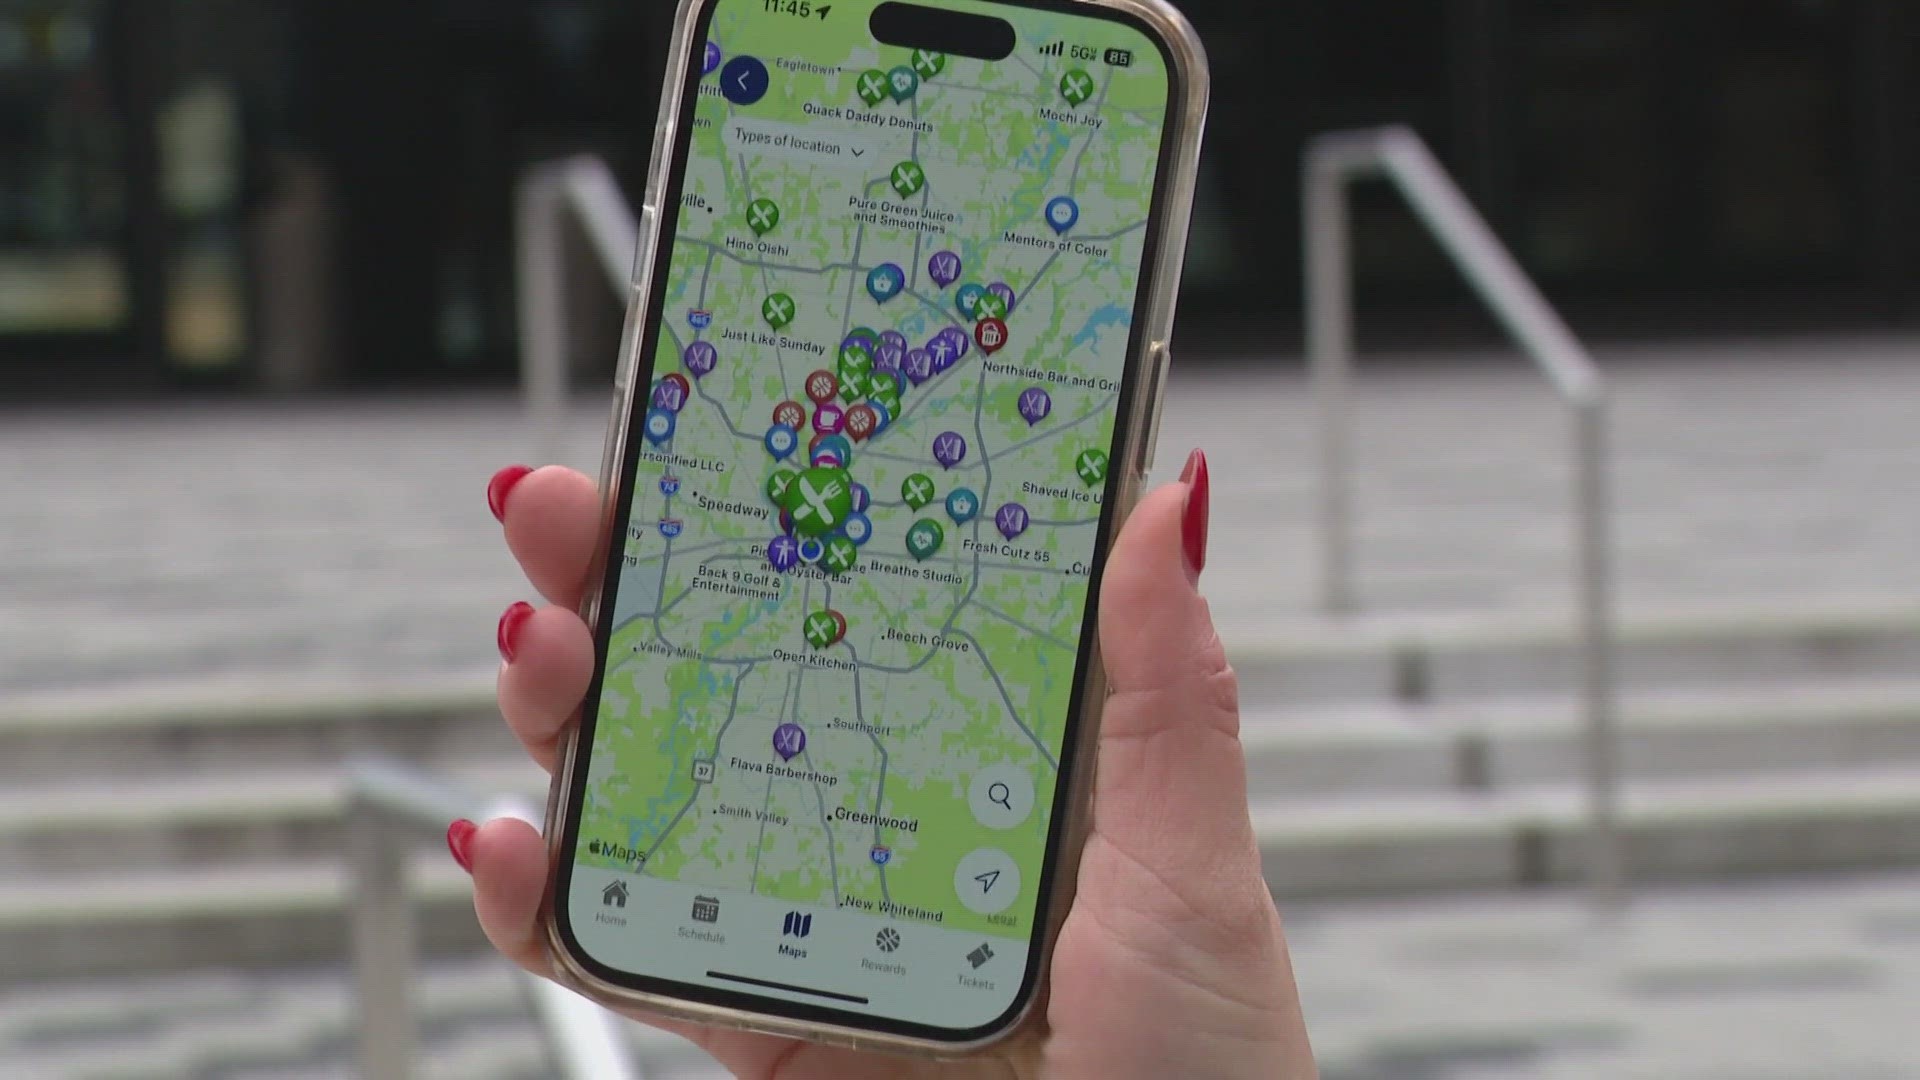 The app shows a map of the state with restaurants, bars, shops and iconic basketball venues.  In return, fans earn rewards by checking in.